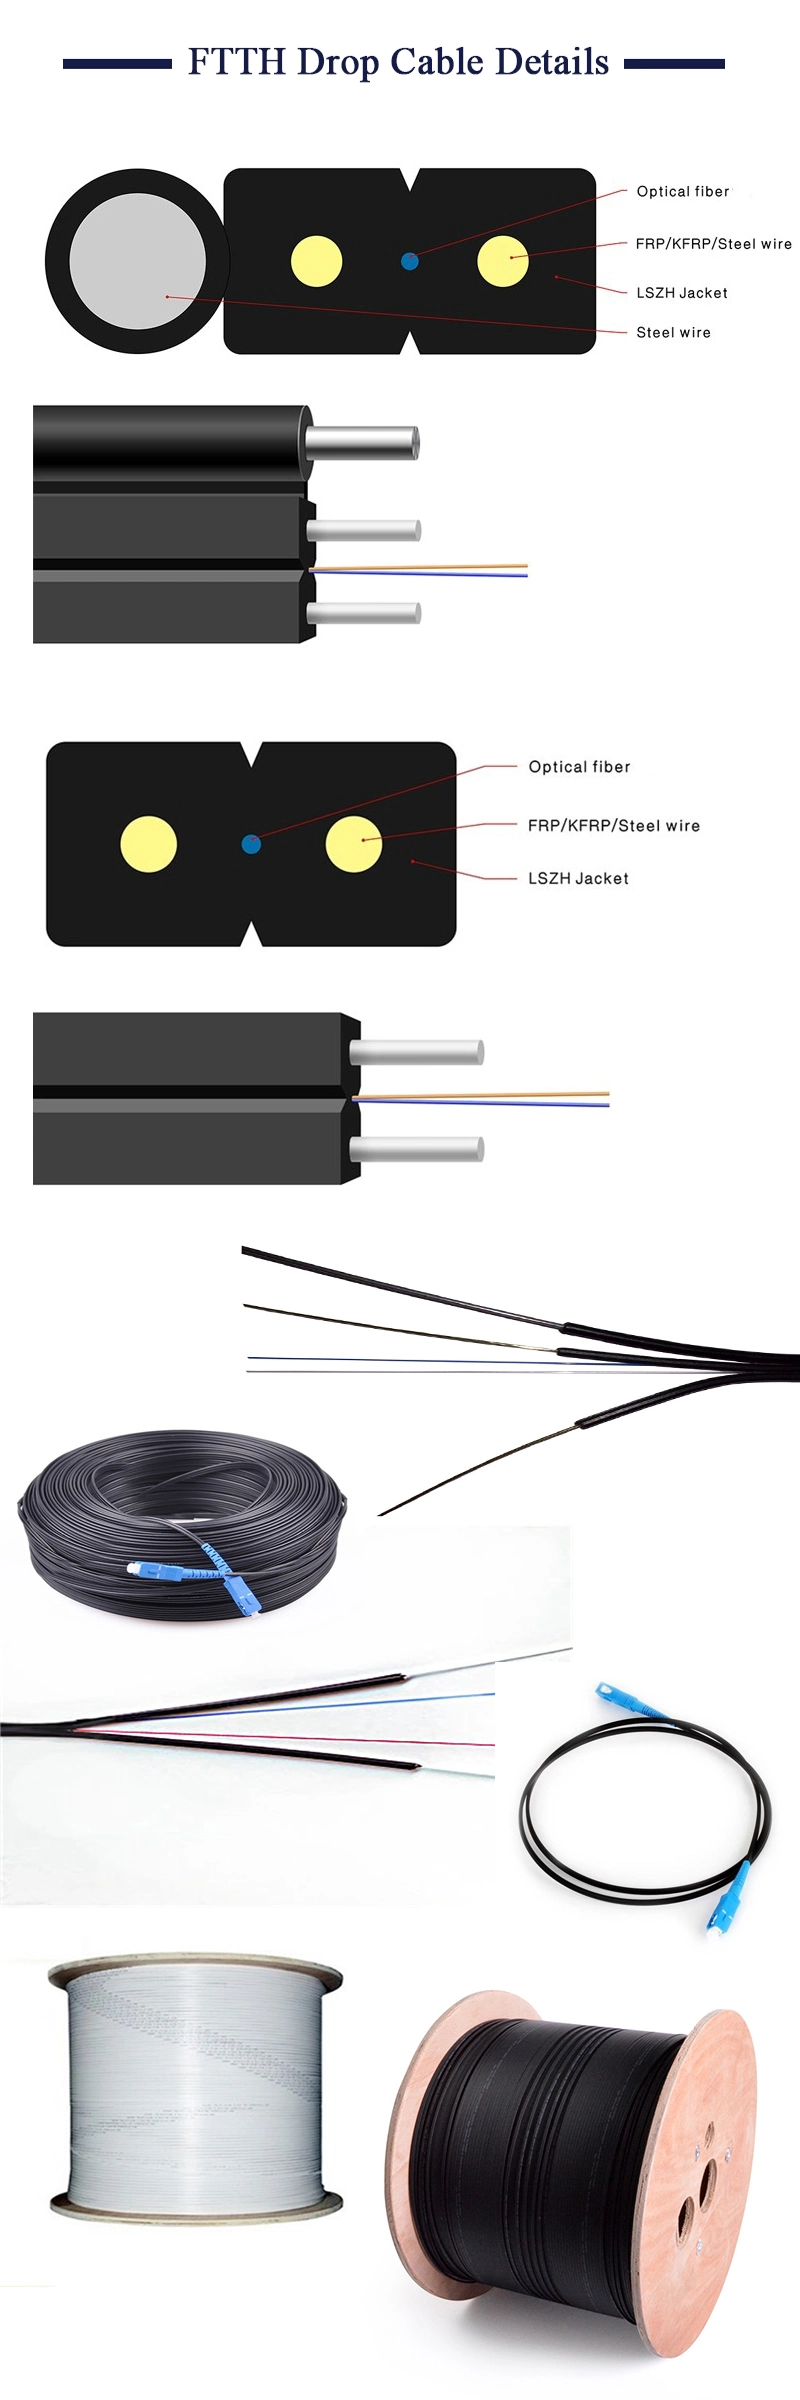 Optic Fibre Cable 1 2 4 6 8 Core Indoor Outdoor Fiber Optic Drop Cable with Steel Wire or FRP Price Fiber Optic Cable